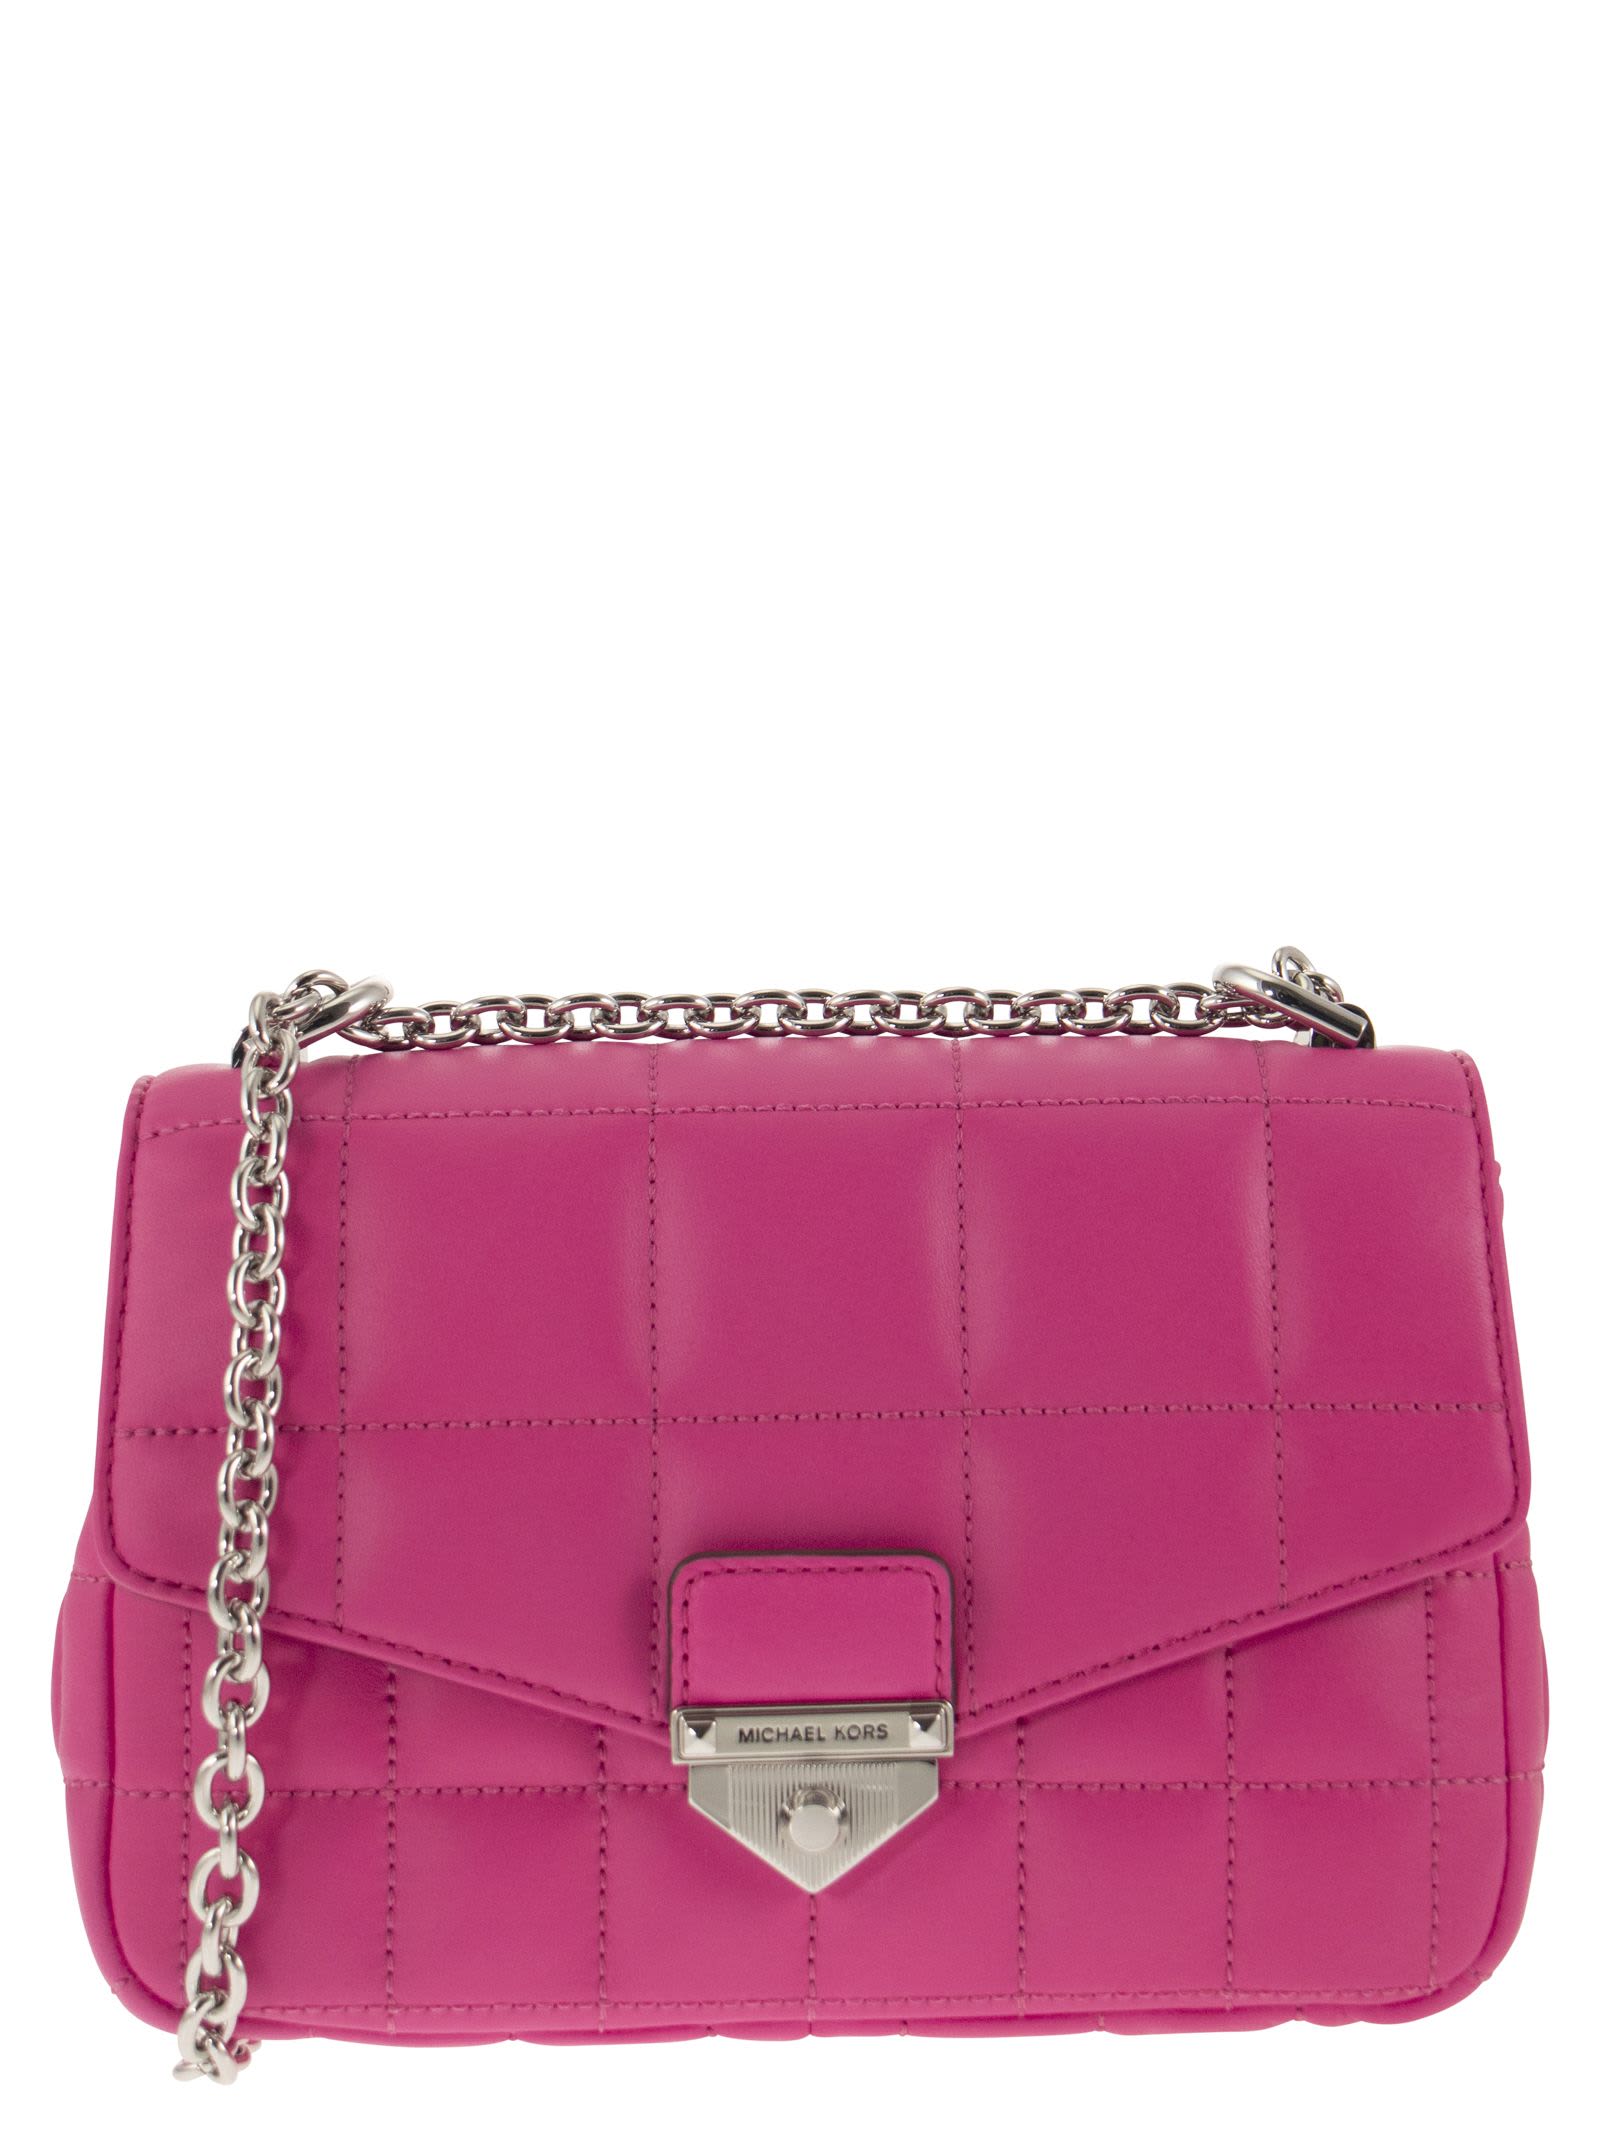 Michael Kors Soho Small Quilted Leather Shoulder Bag